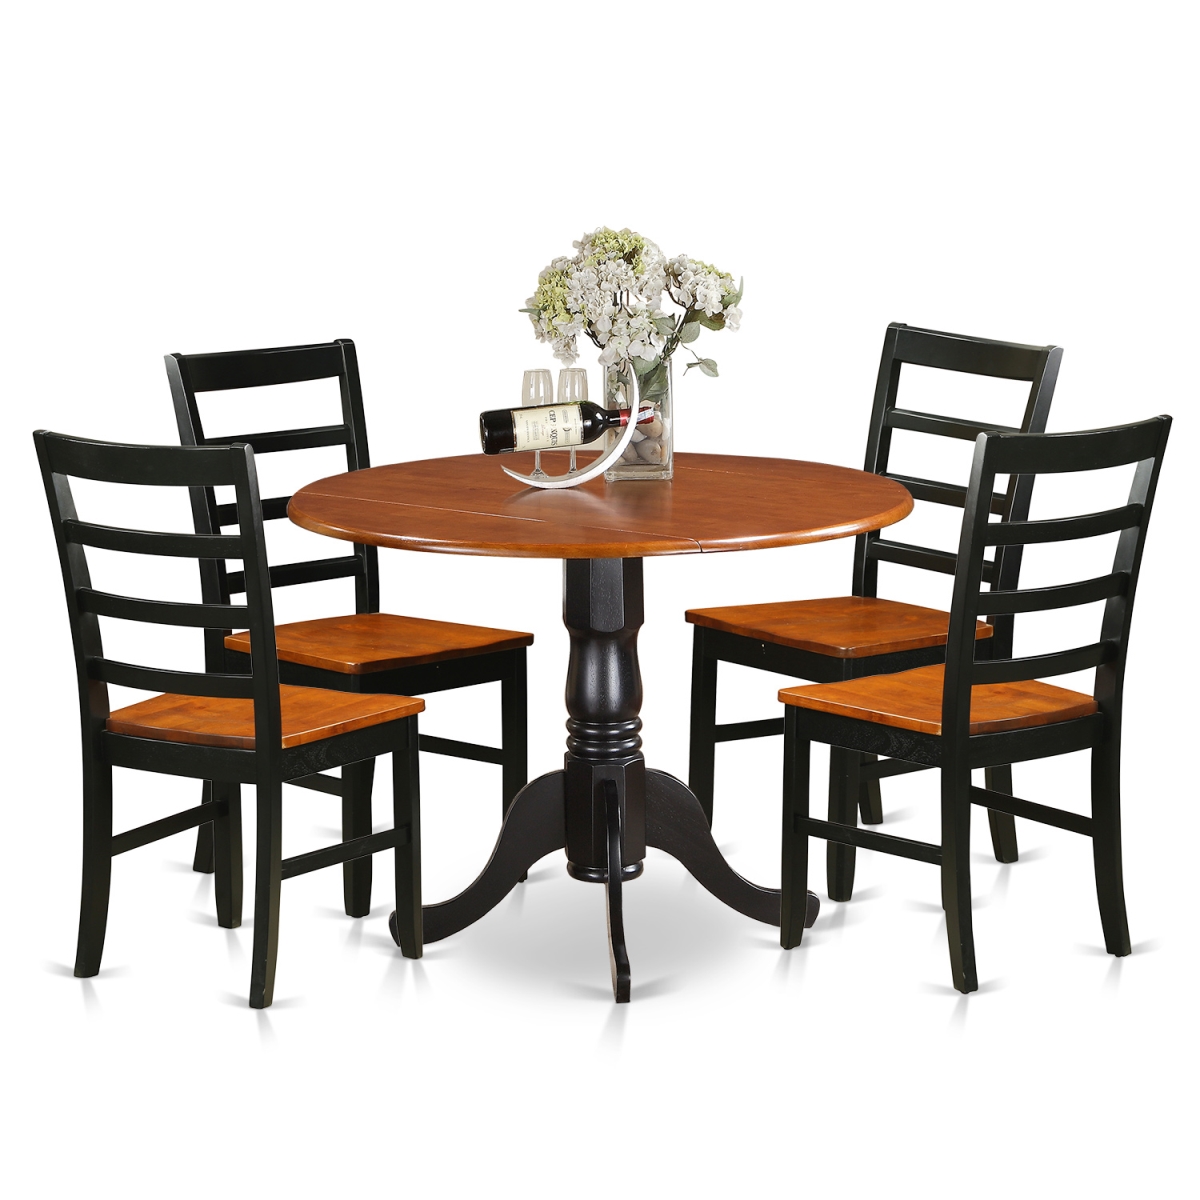 Picture of East West Furniture DLPF5-BCH-W Dublin Kitchen Table Set - Dining Table & 4 Wooden Chairs, Black & Cherry - 5 Piece